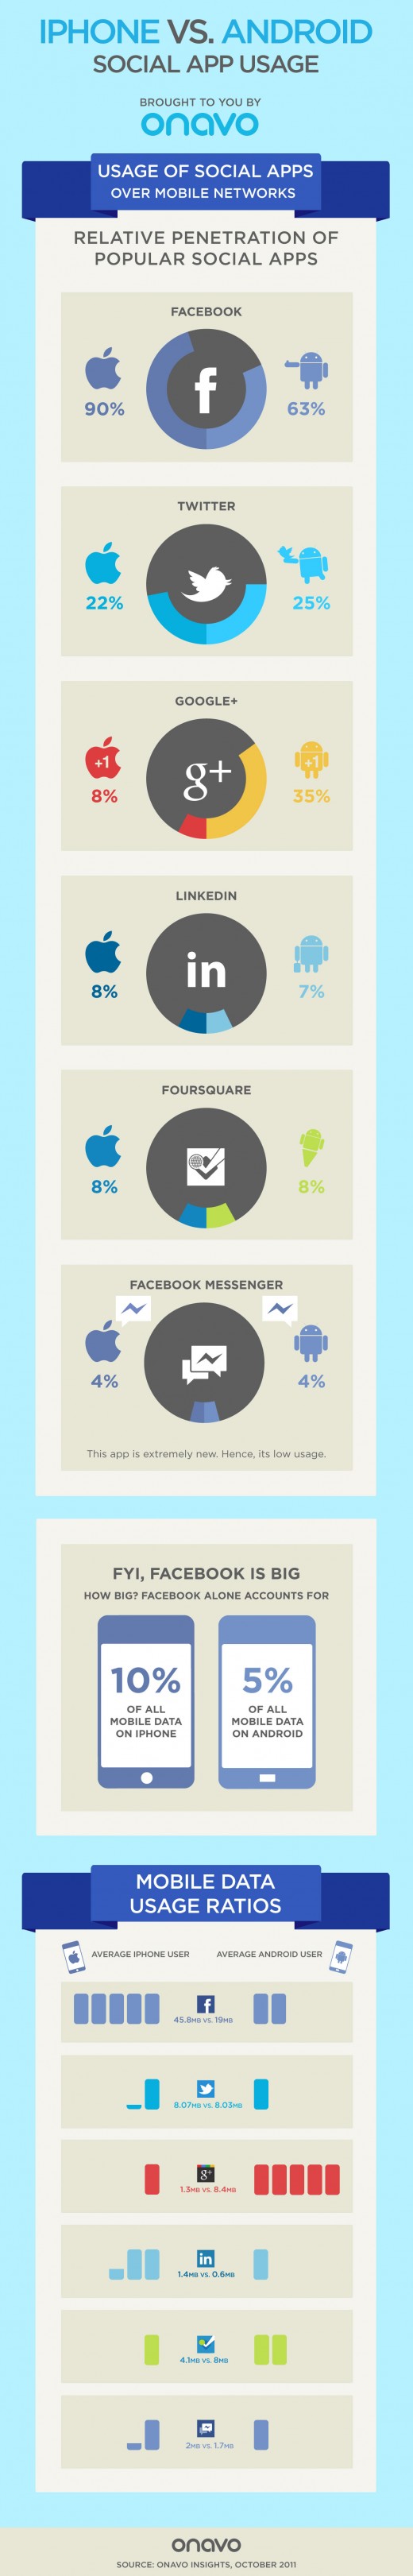 iPhone vs. Android: Social Networking Infografik